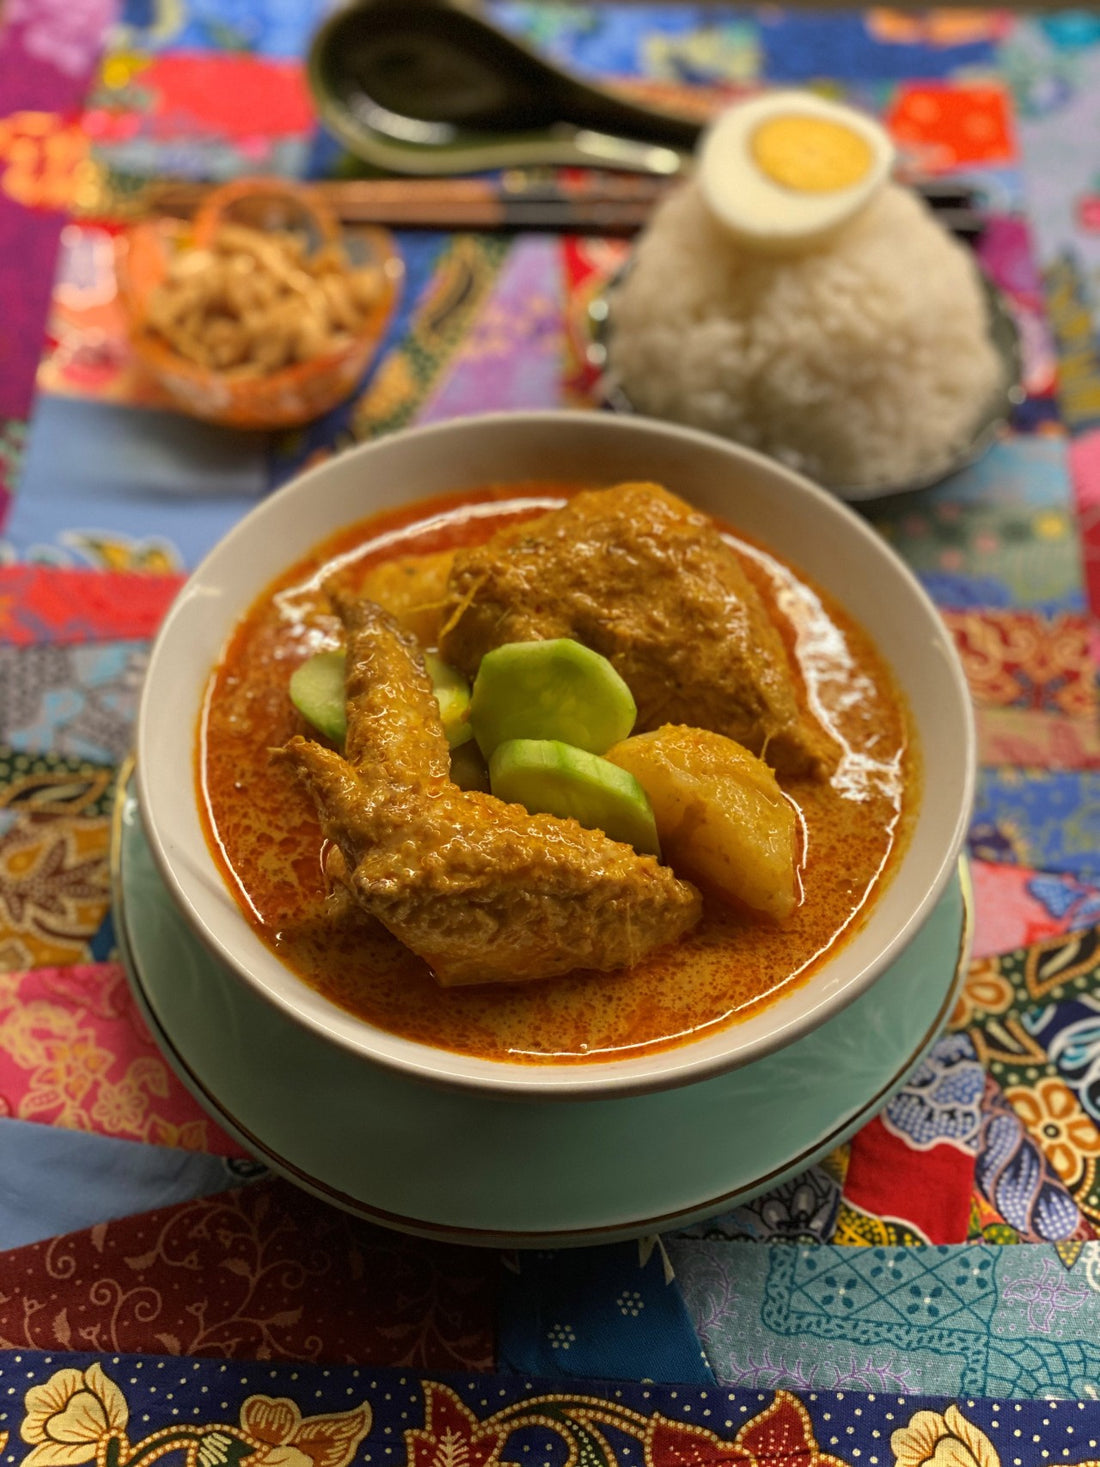 The Family's Chicken Curry